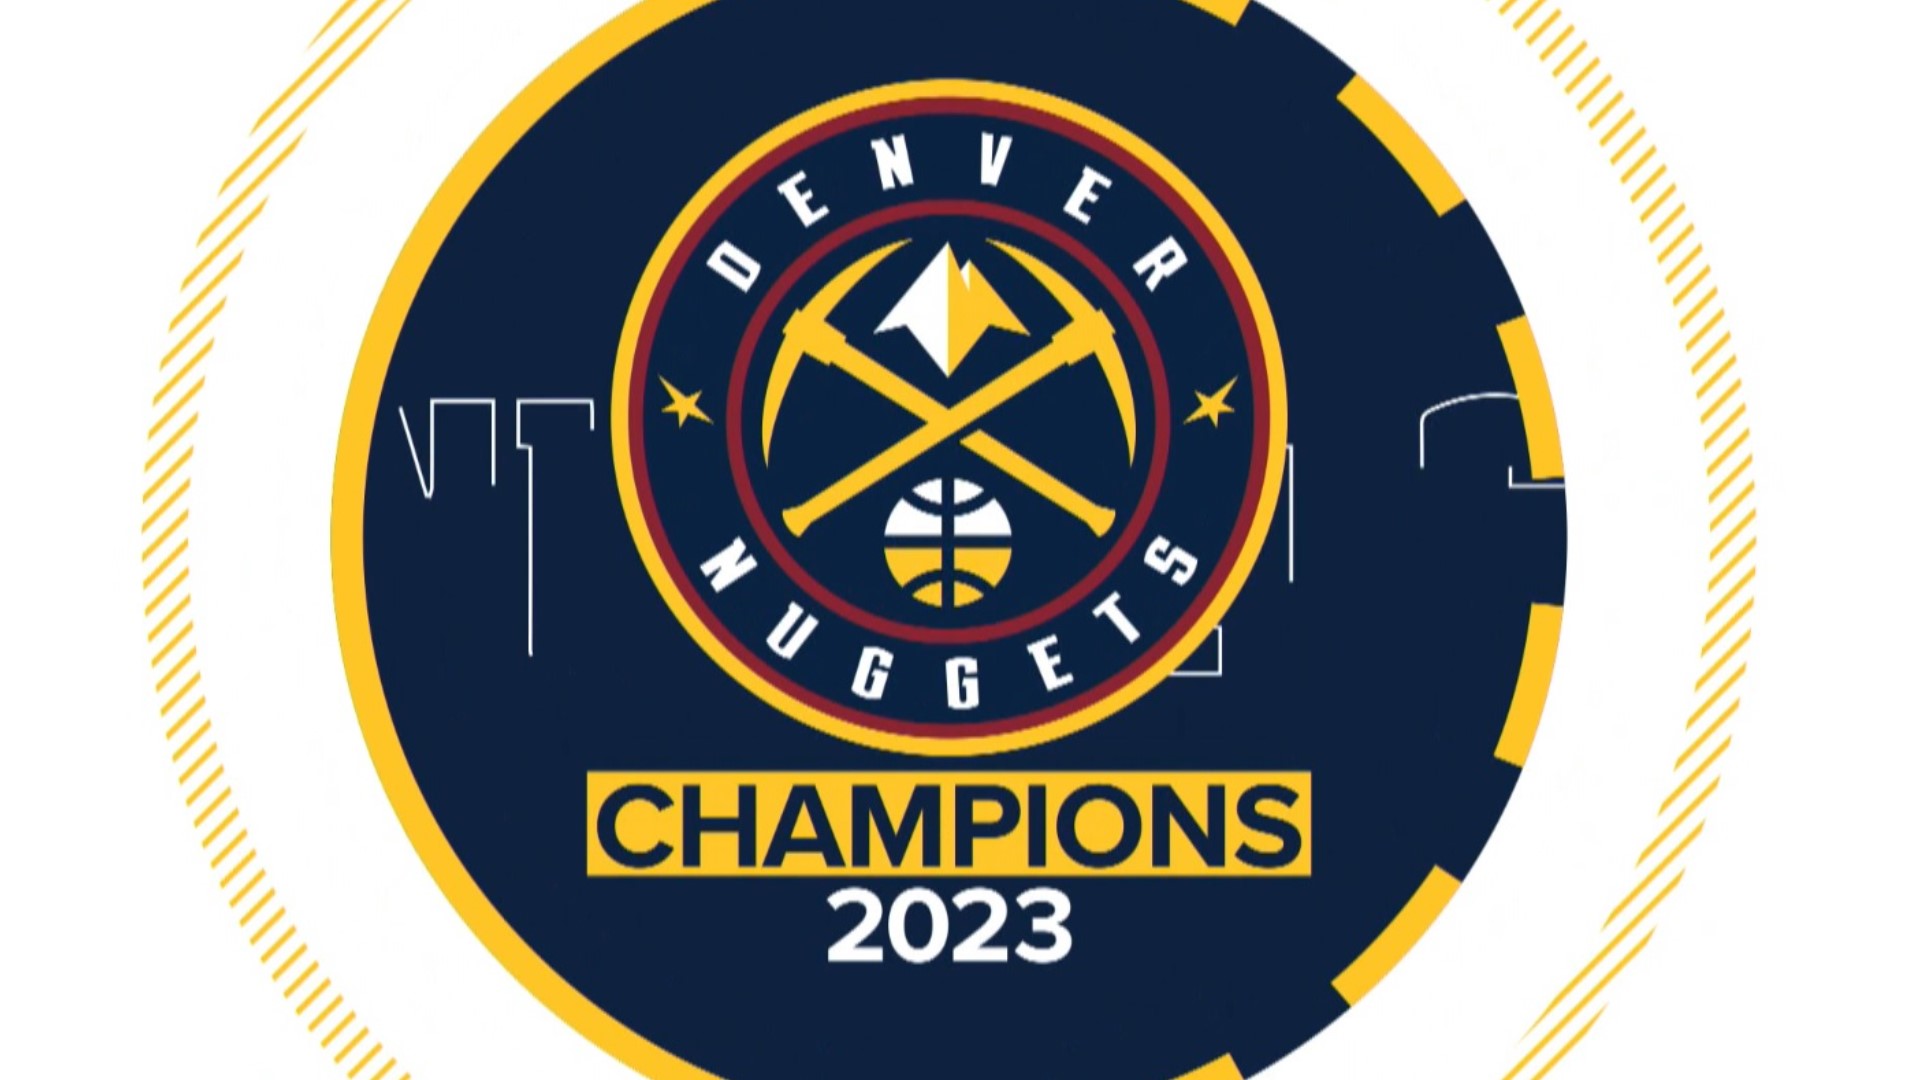 Denver will recognize its 2023 NBA title on Tuesday in the season opener.